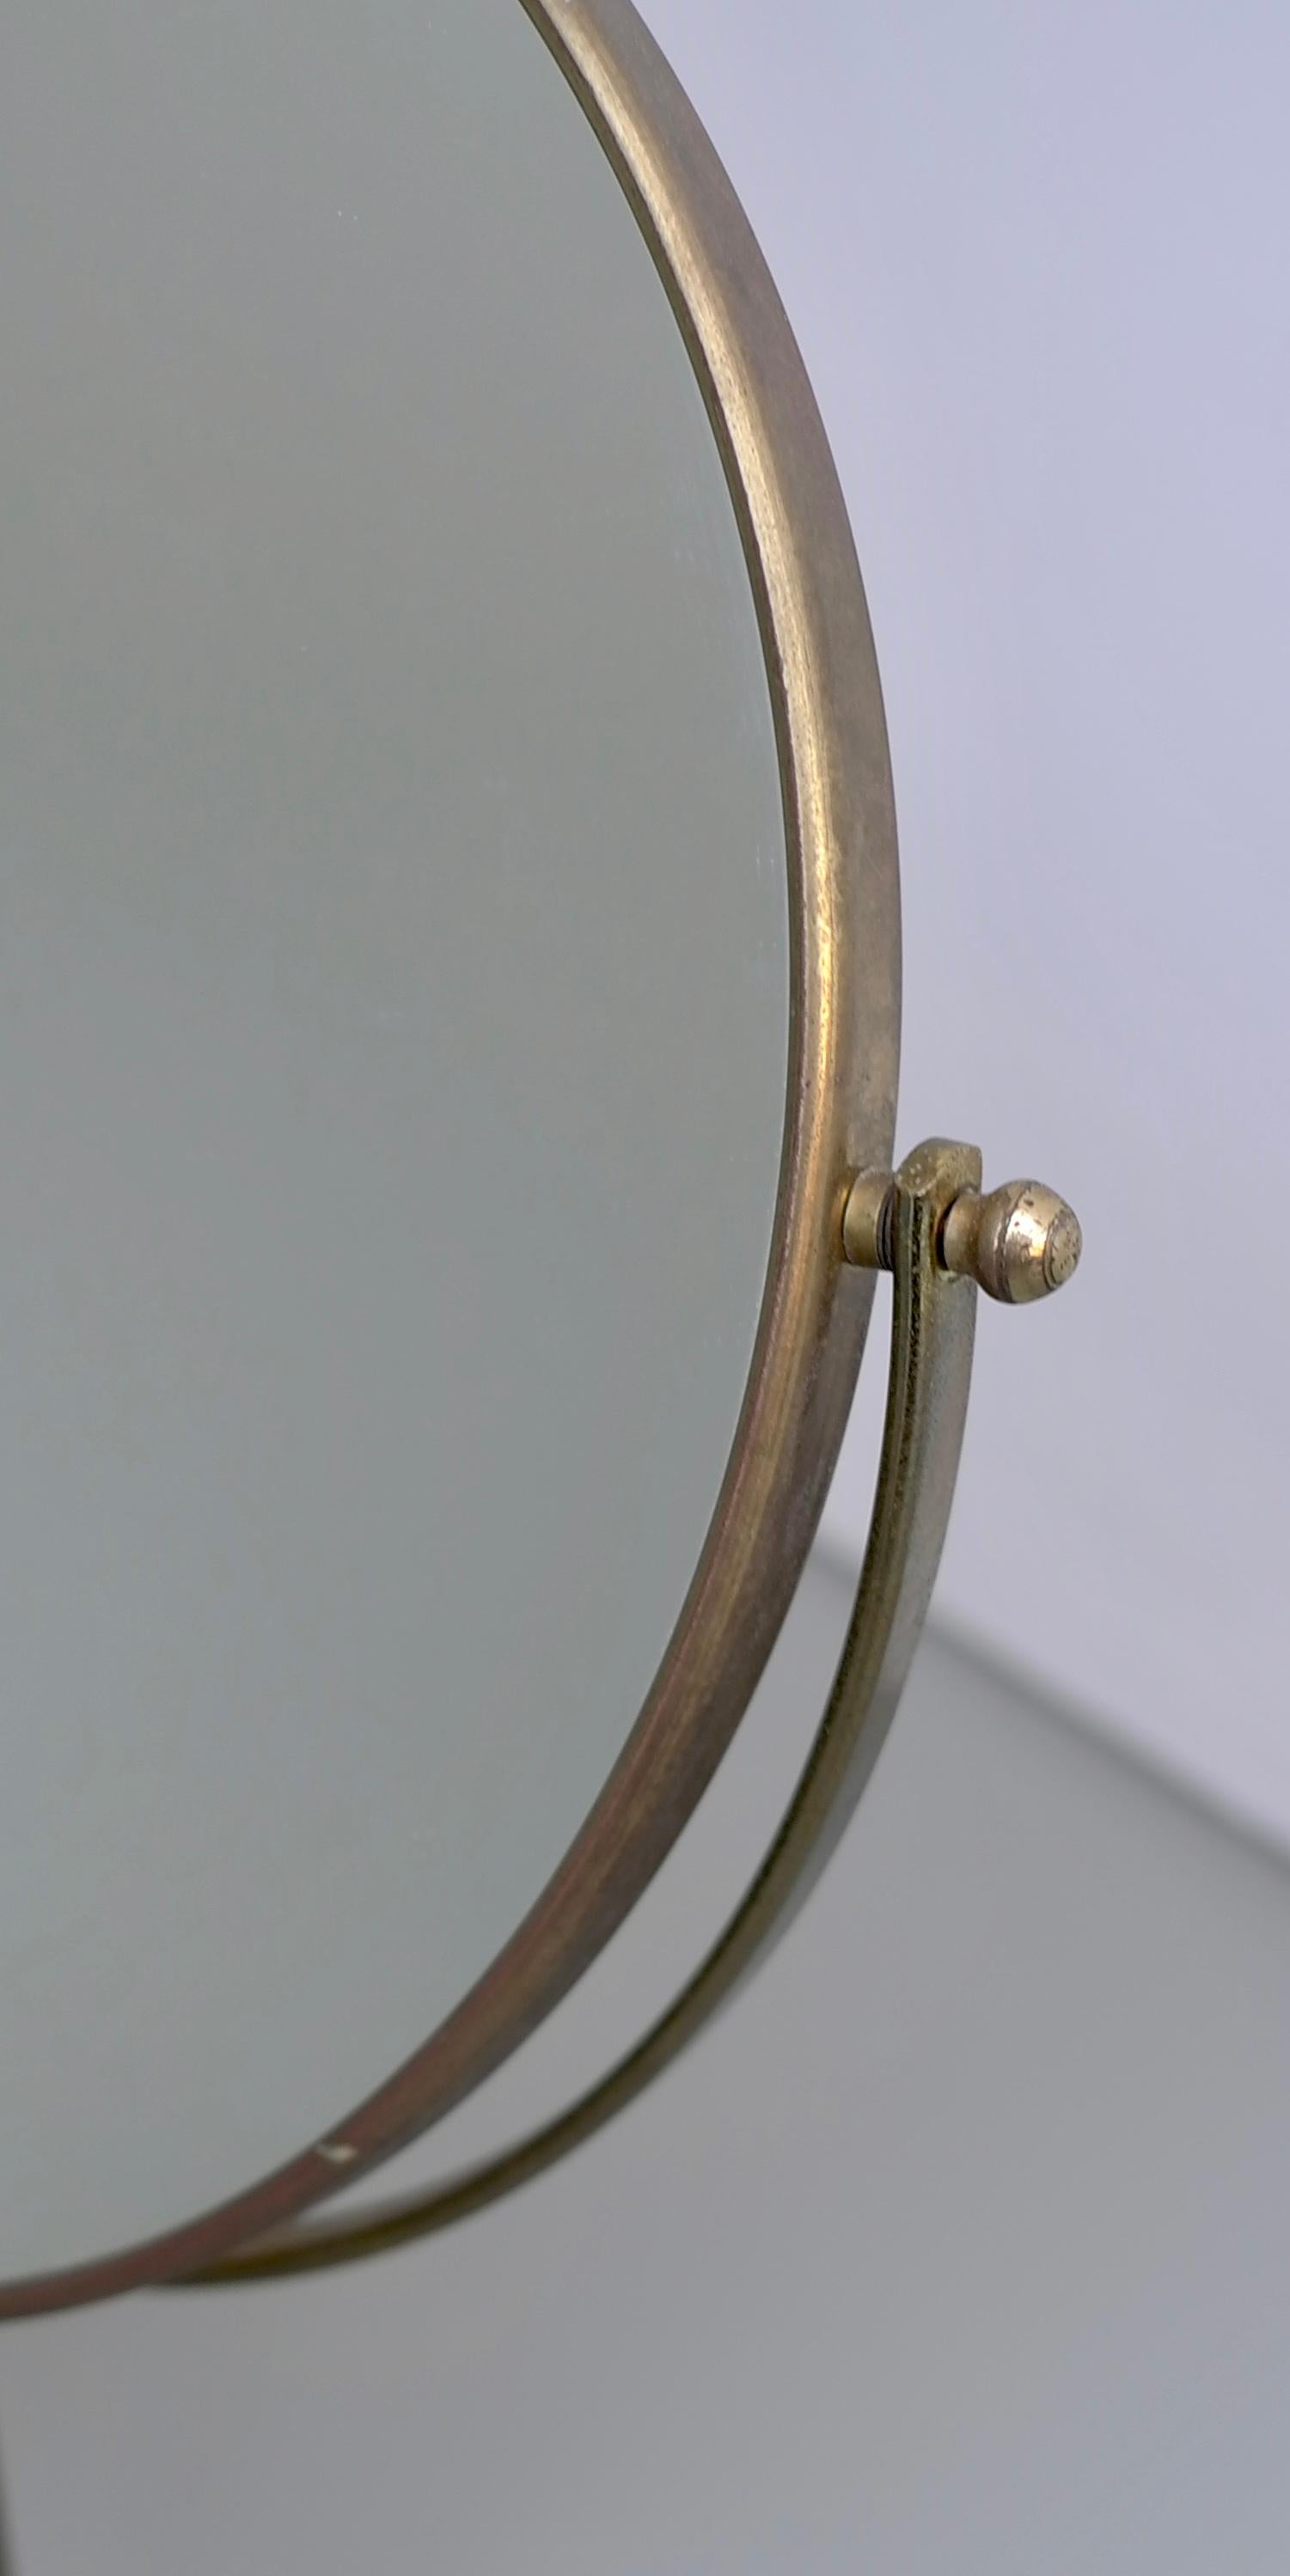 Vanity make up table mirror in brass, France, 1940s.

Mirror on both sides, one normal and the other for close up.